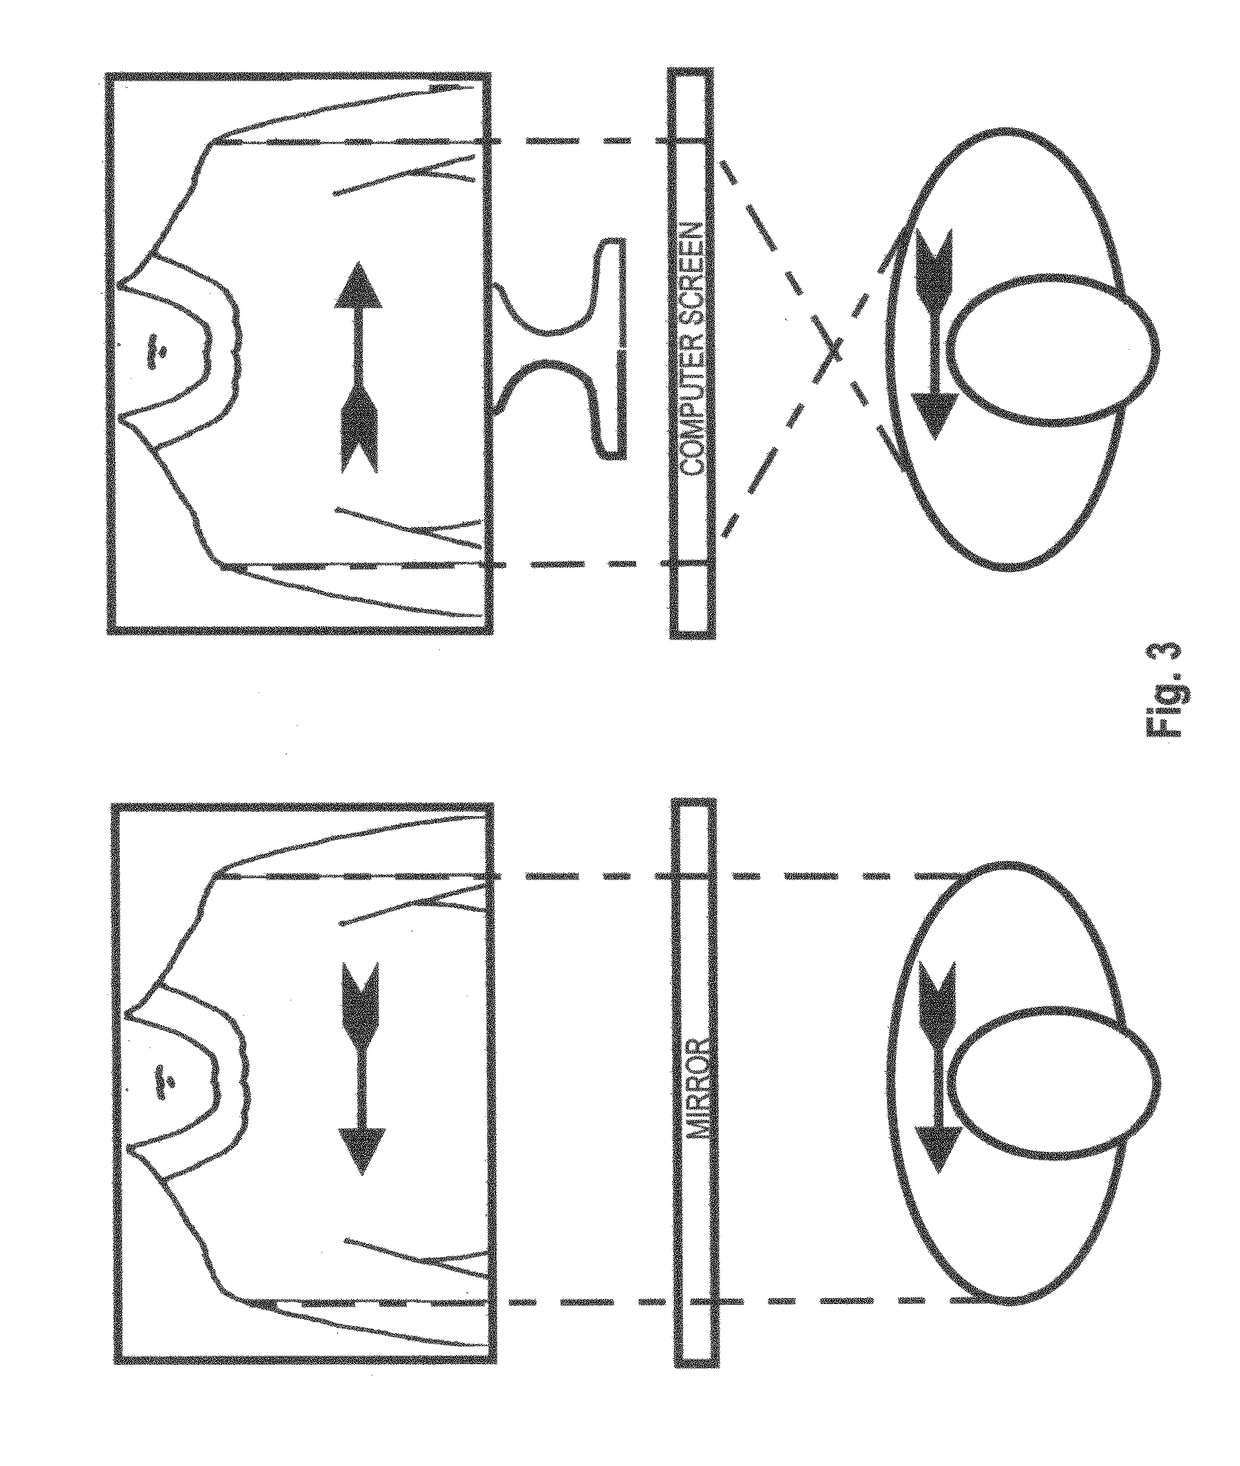 Solo home user skin imaging method, alignment aid, and chromatic filter for detecting growth of early melanomas